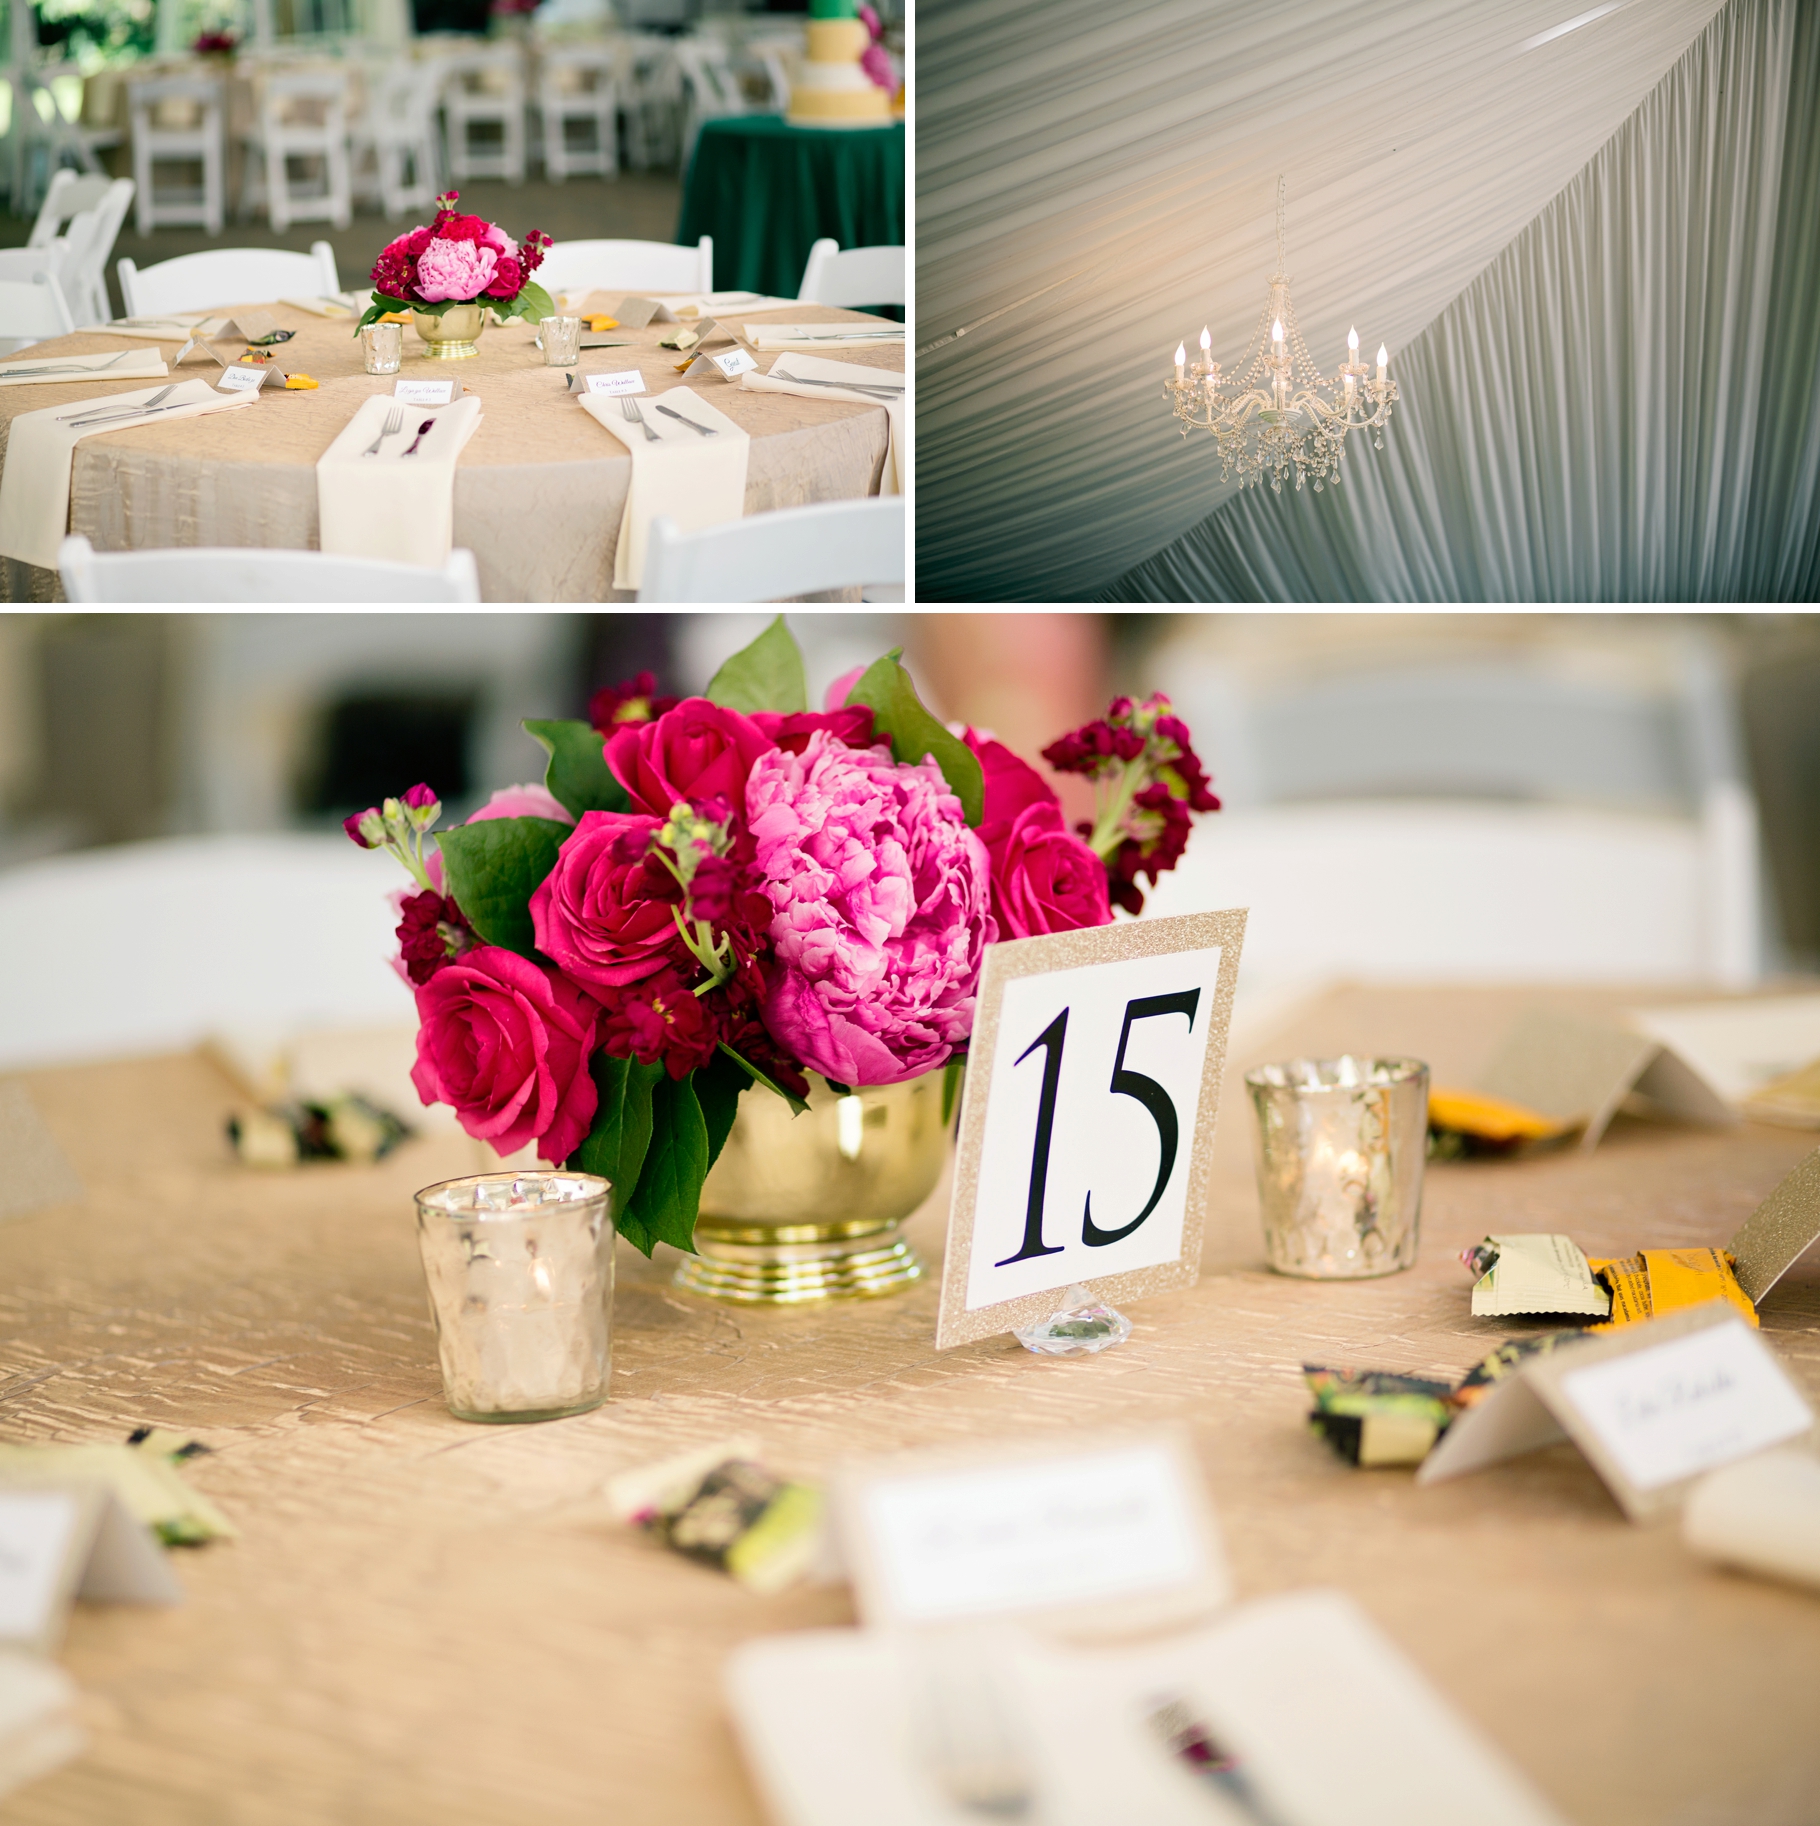 36-Reception-Gold-Chandeliers-Pink-Peonies-Table-Settings-Rock-Creek-Gardens-Seattle-Wedding-Photography-by-Betty-Elaine